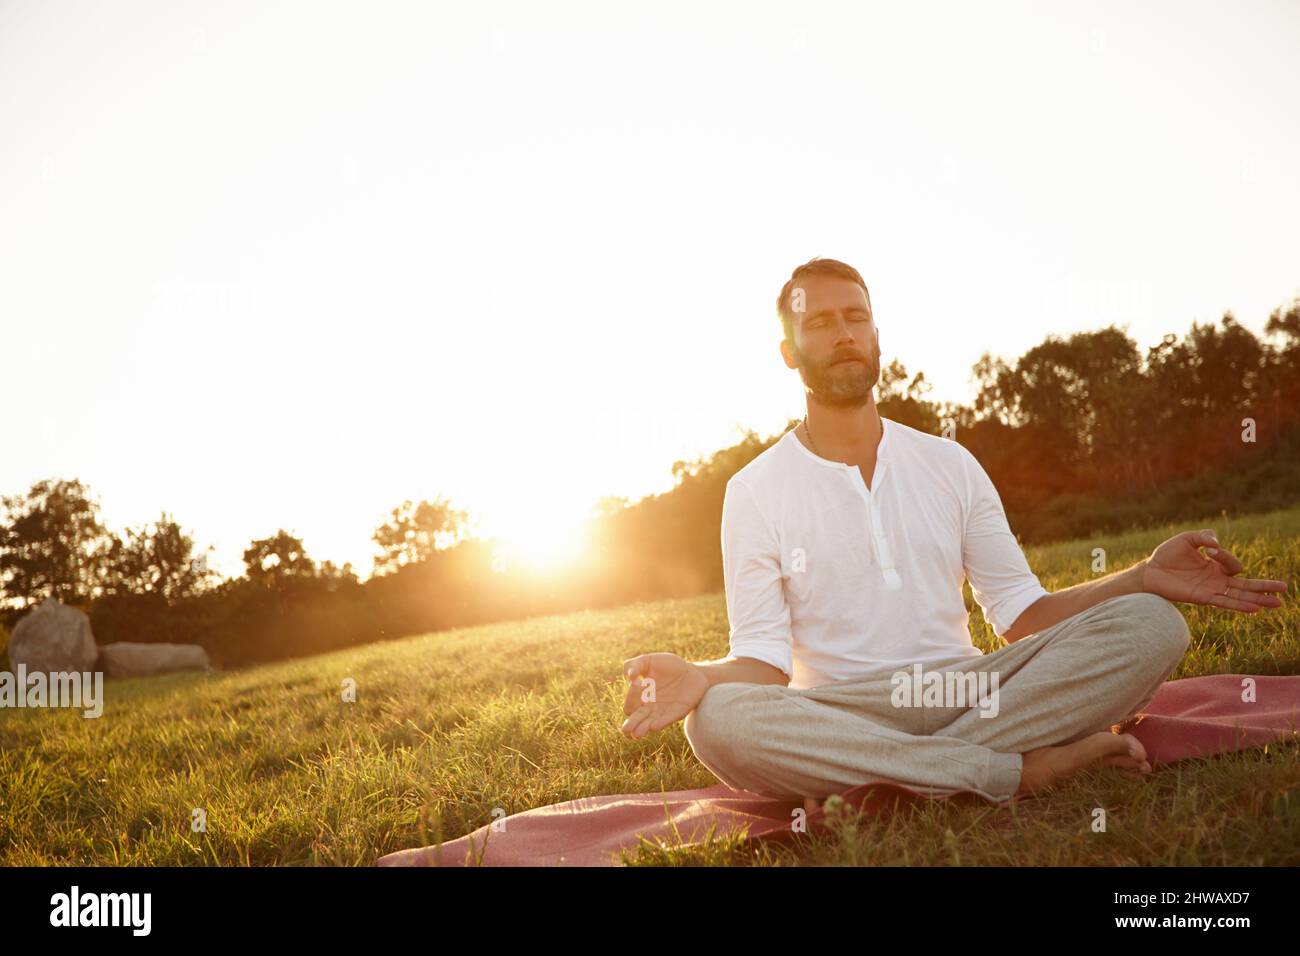 Transcendance at sunset. Shot of a handsome mature man meditating in the outdoors at sunset. Stock Photo